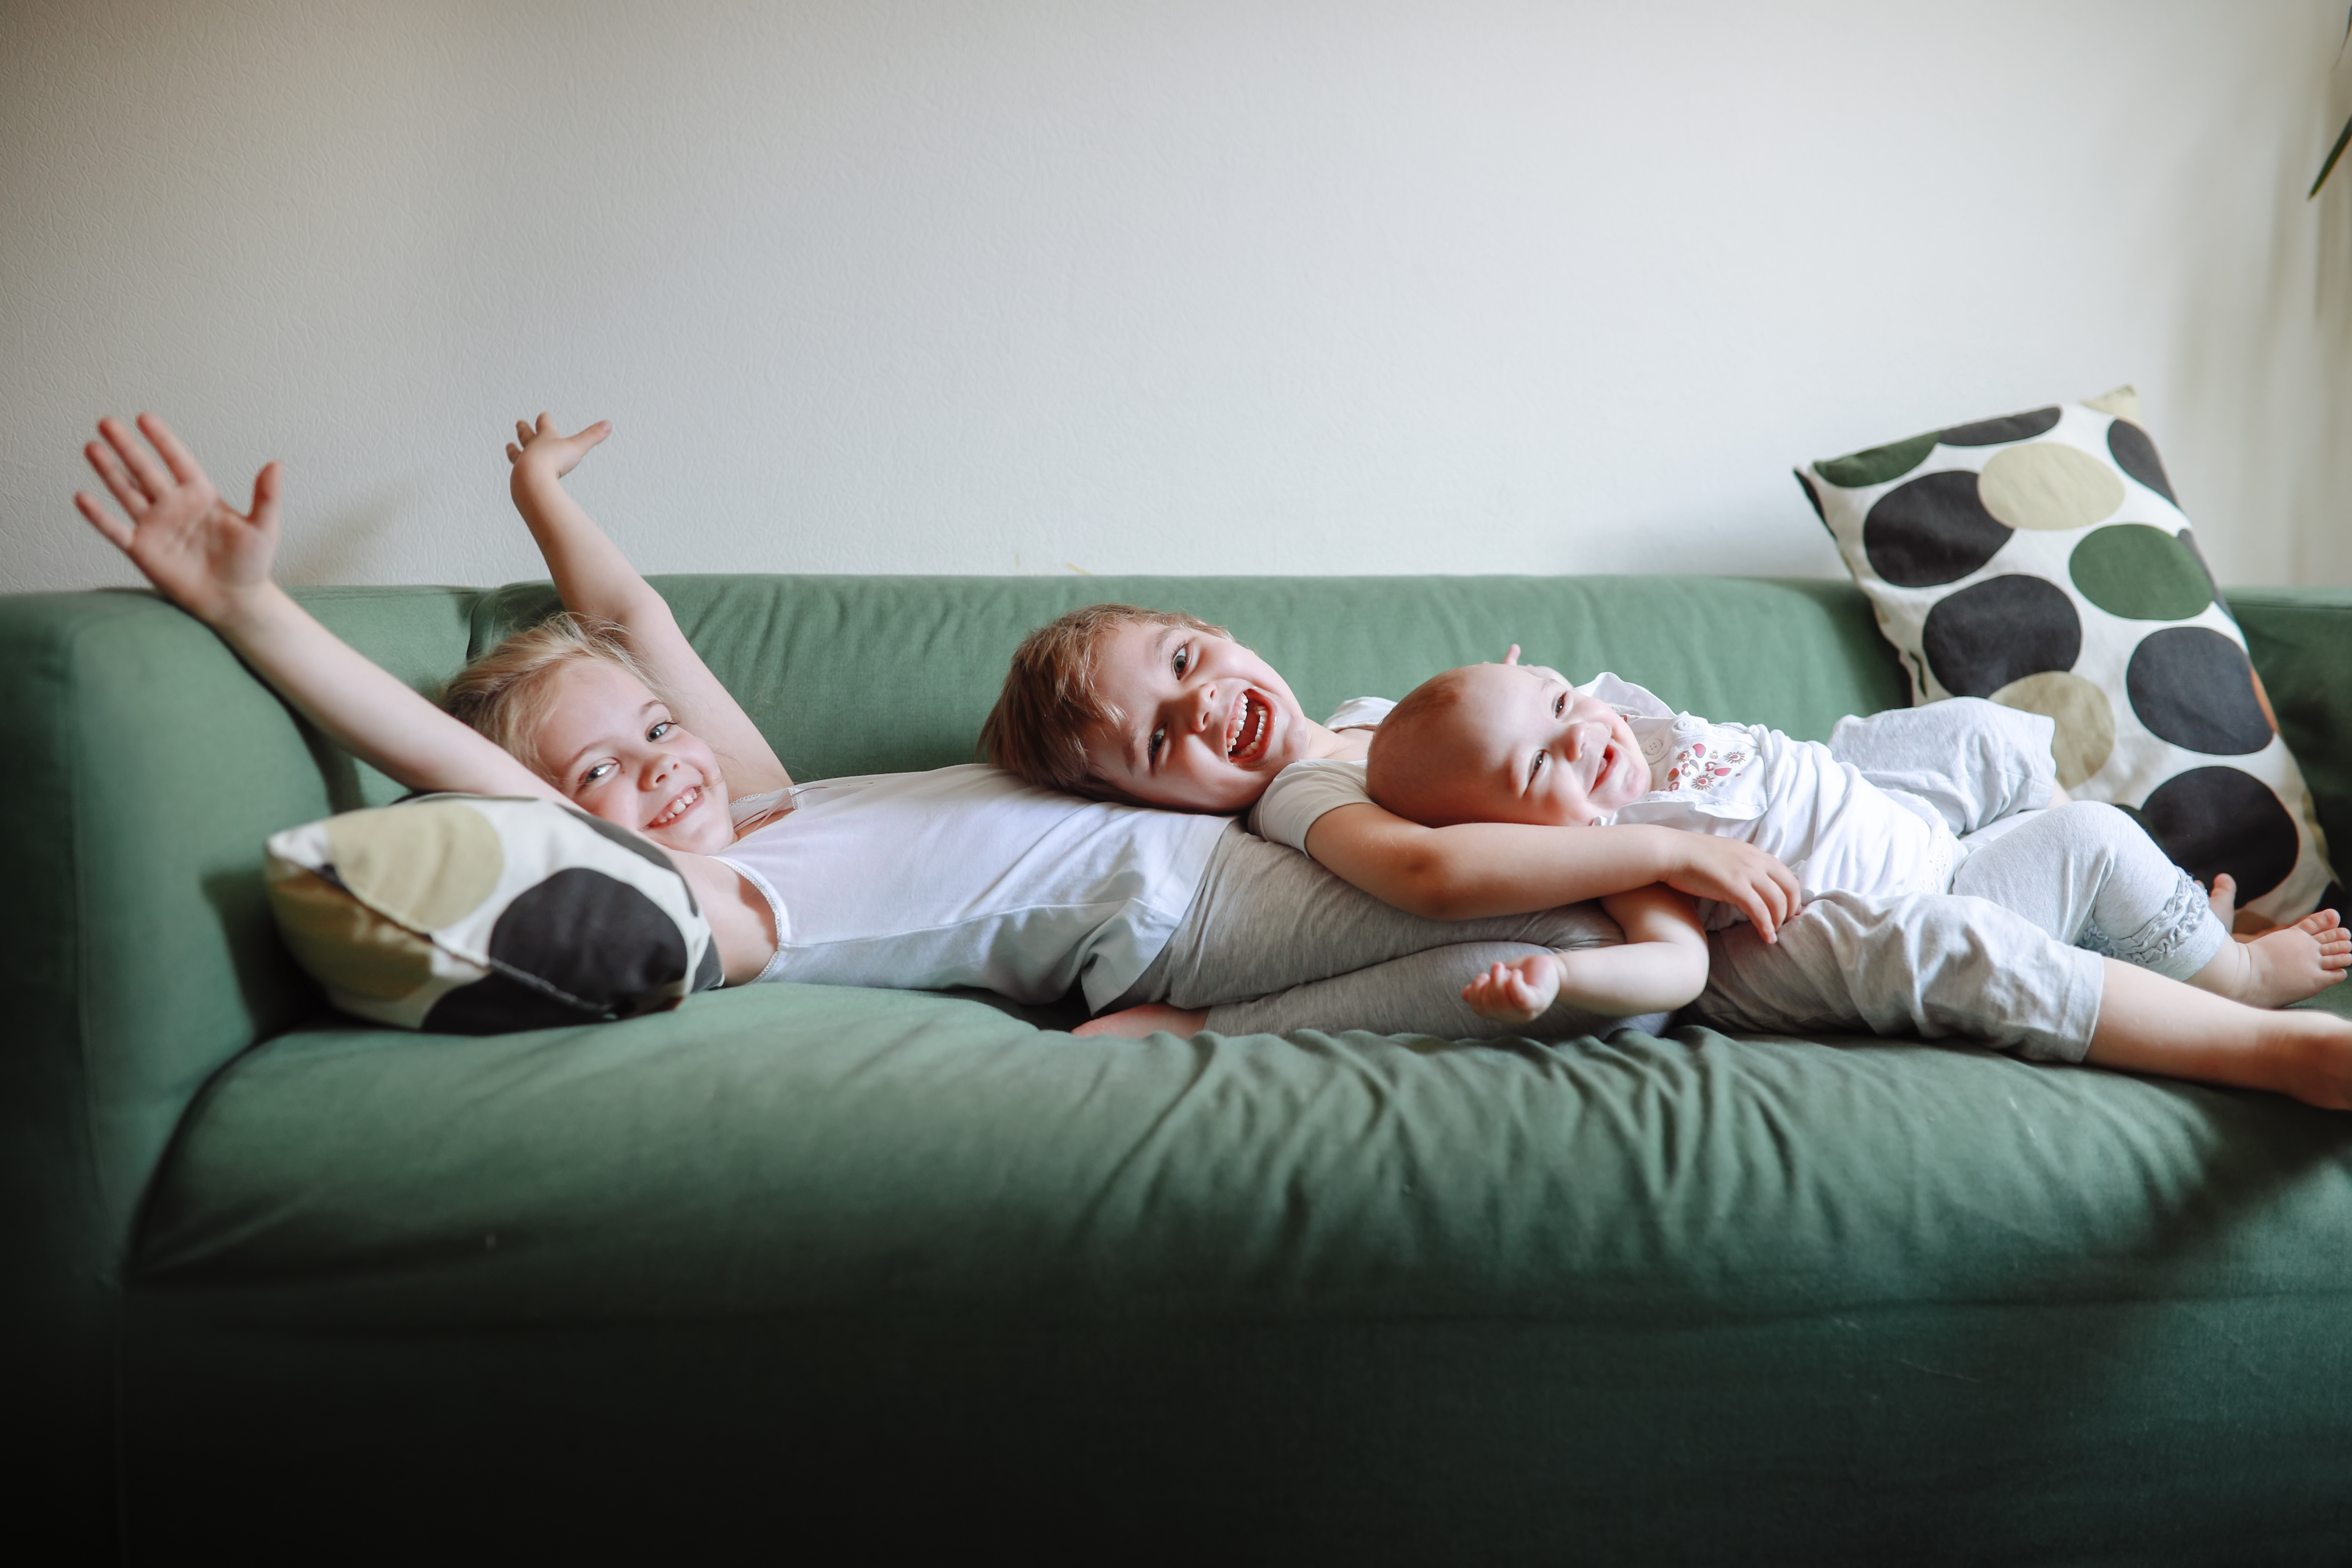 Three happy siblings lying on a sofa | Source: Getty Images